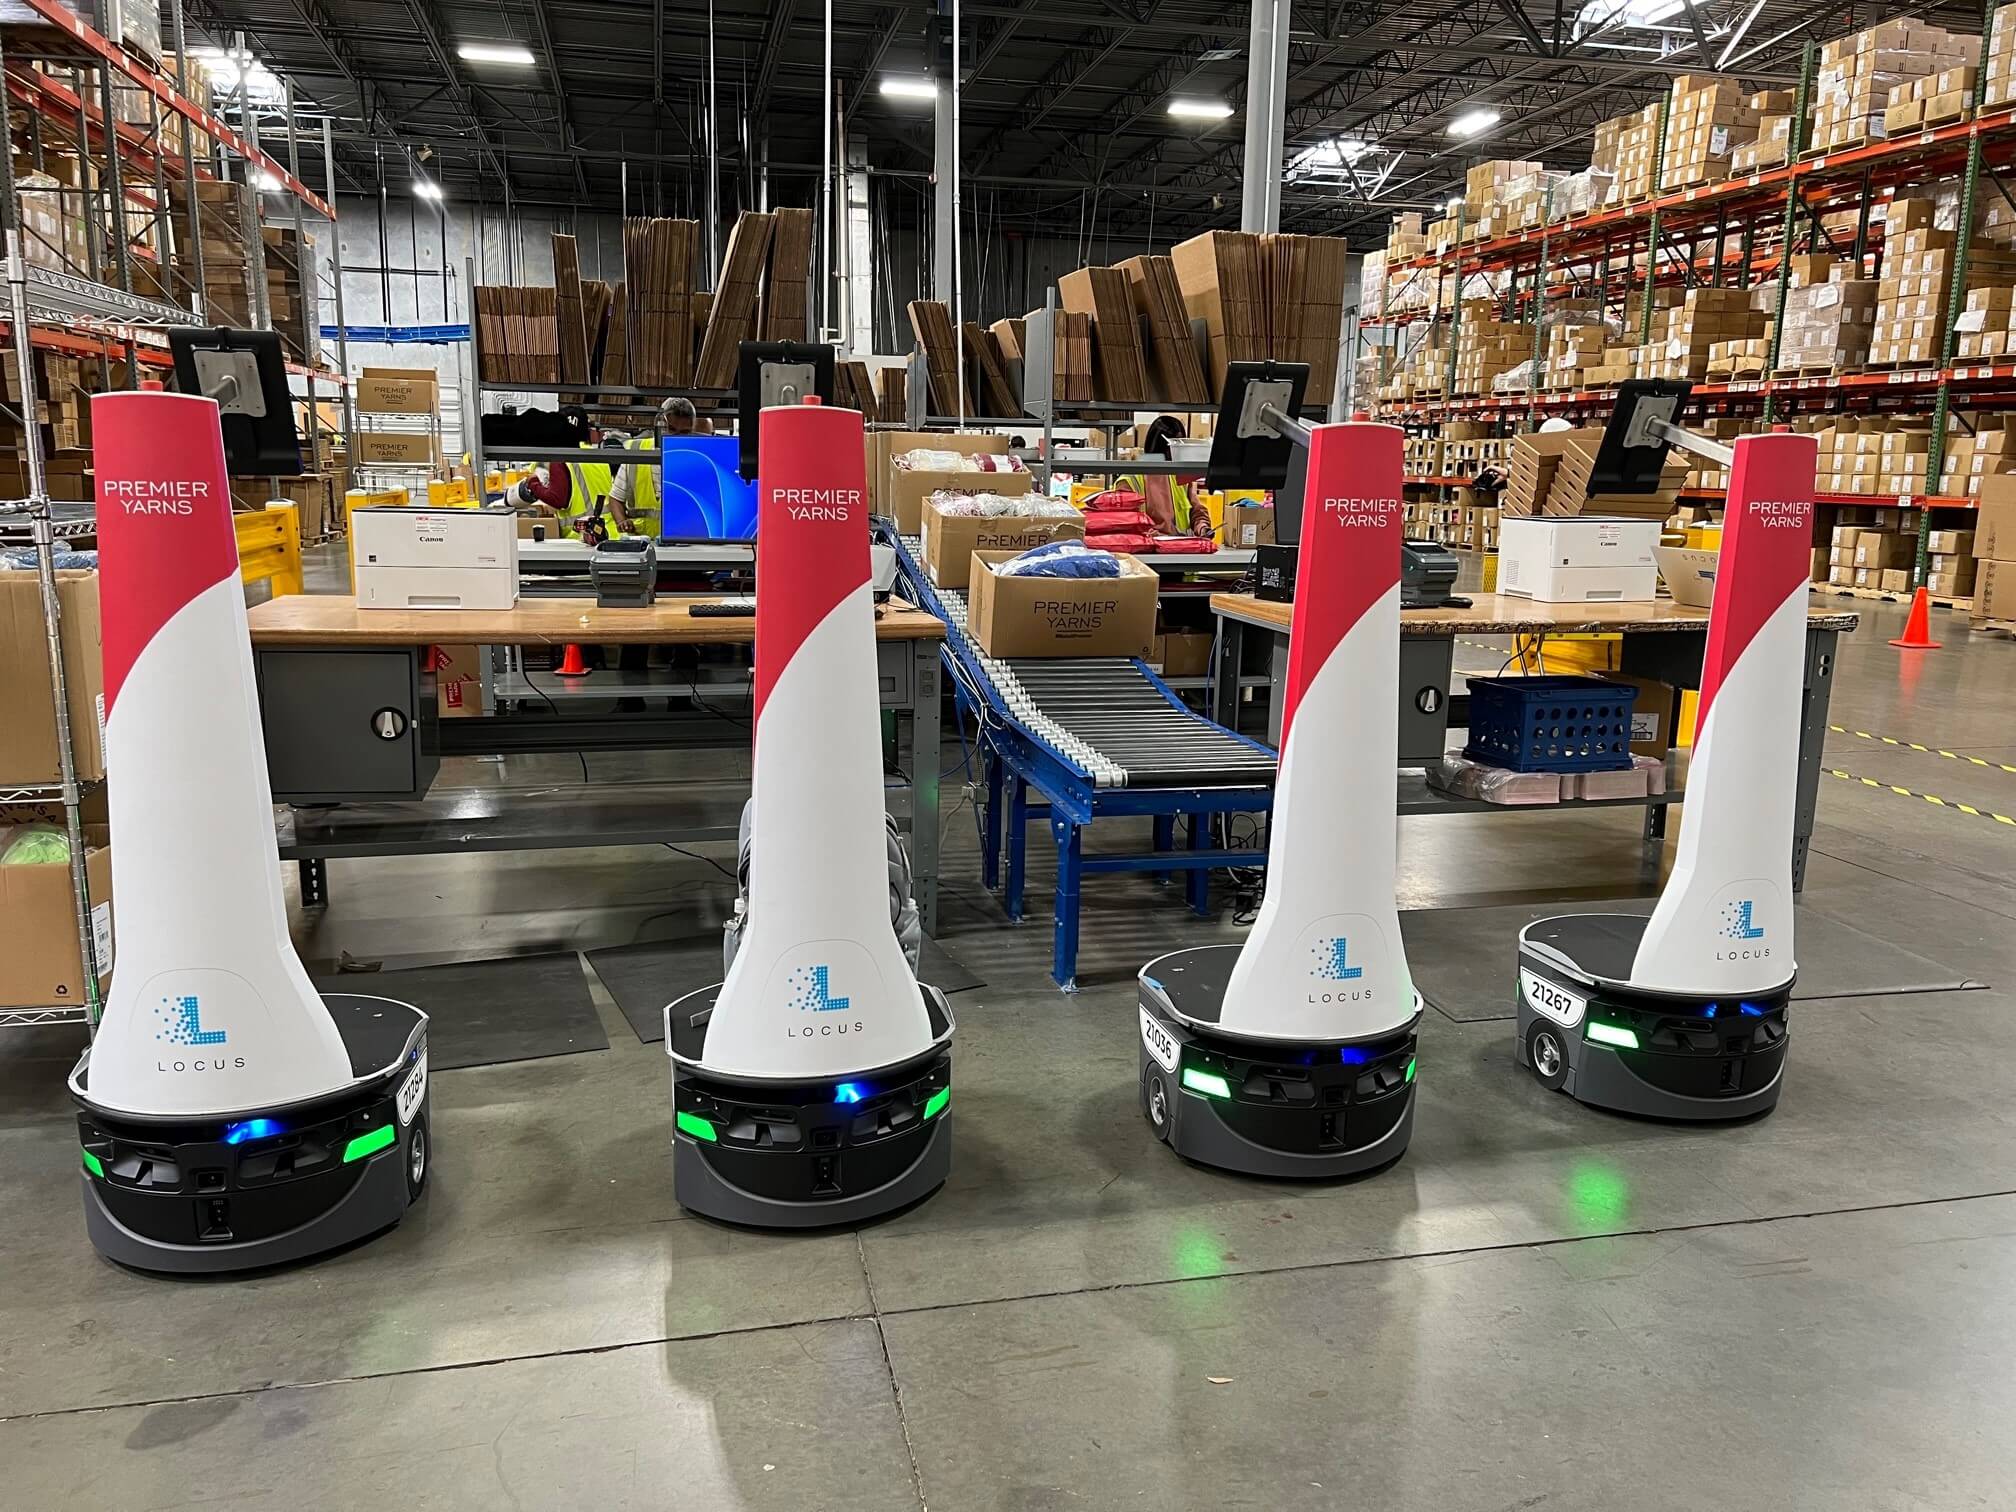 Locus mobile robots deliver orders to induction where they are checked, packed and labeled at new packing stations, then placed on the conveyor for delivery to shipping.